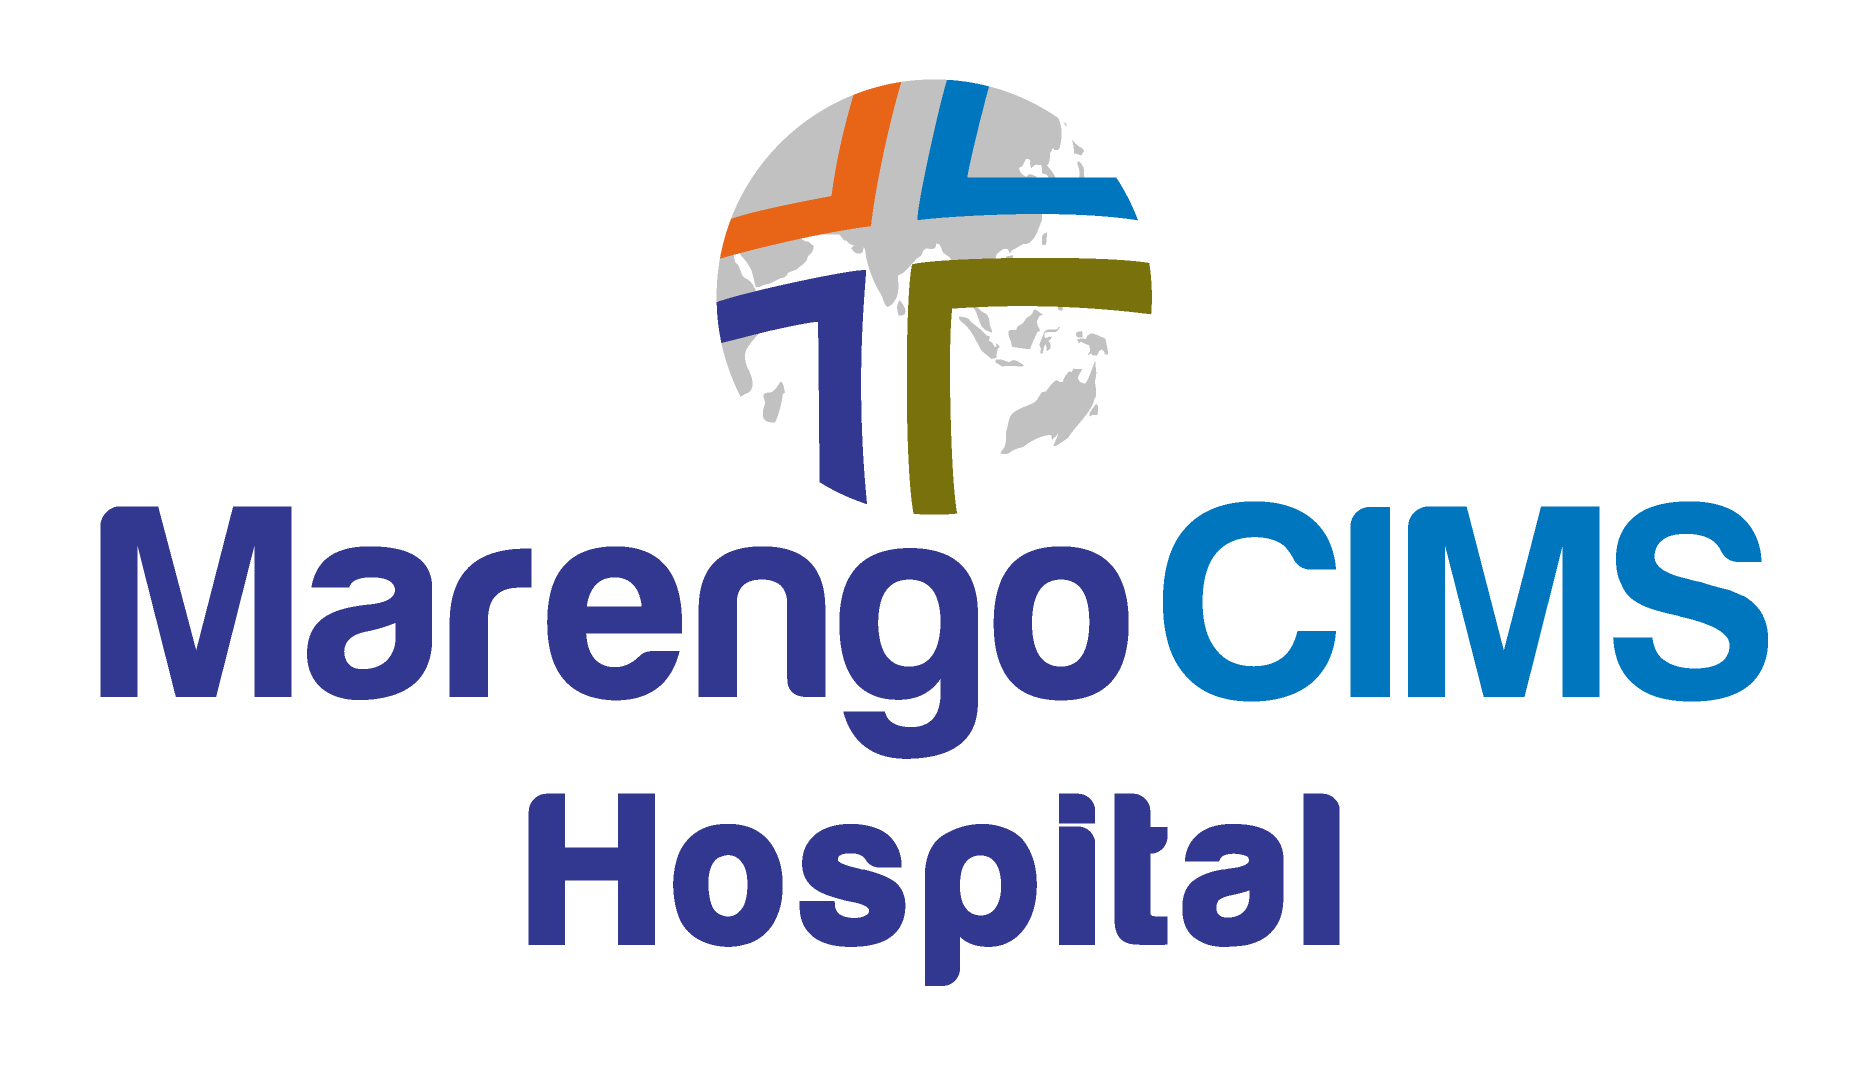 Marengo CIMS Hospital in Ahmedabad - Ranked Amongst Best Hospital in India